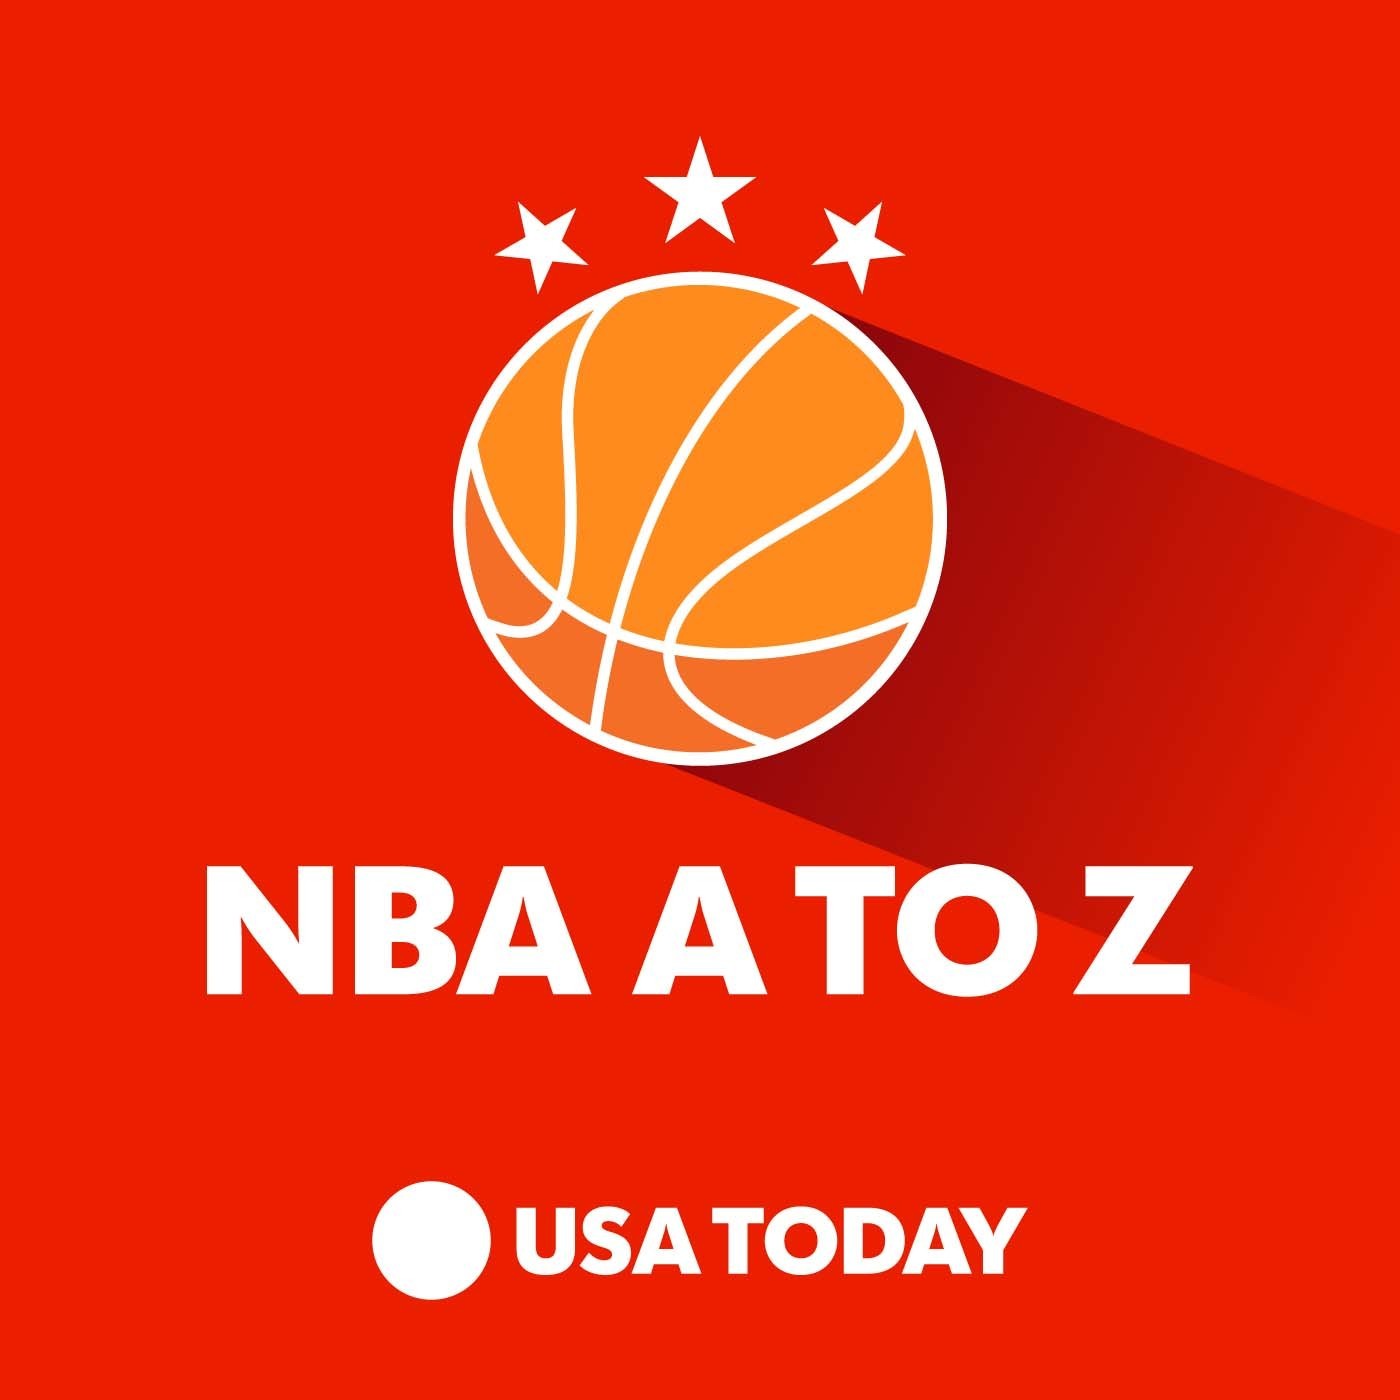 The NBA A to Z Playoff Breakdown